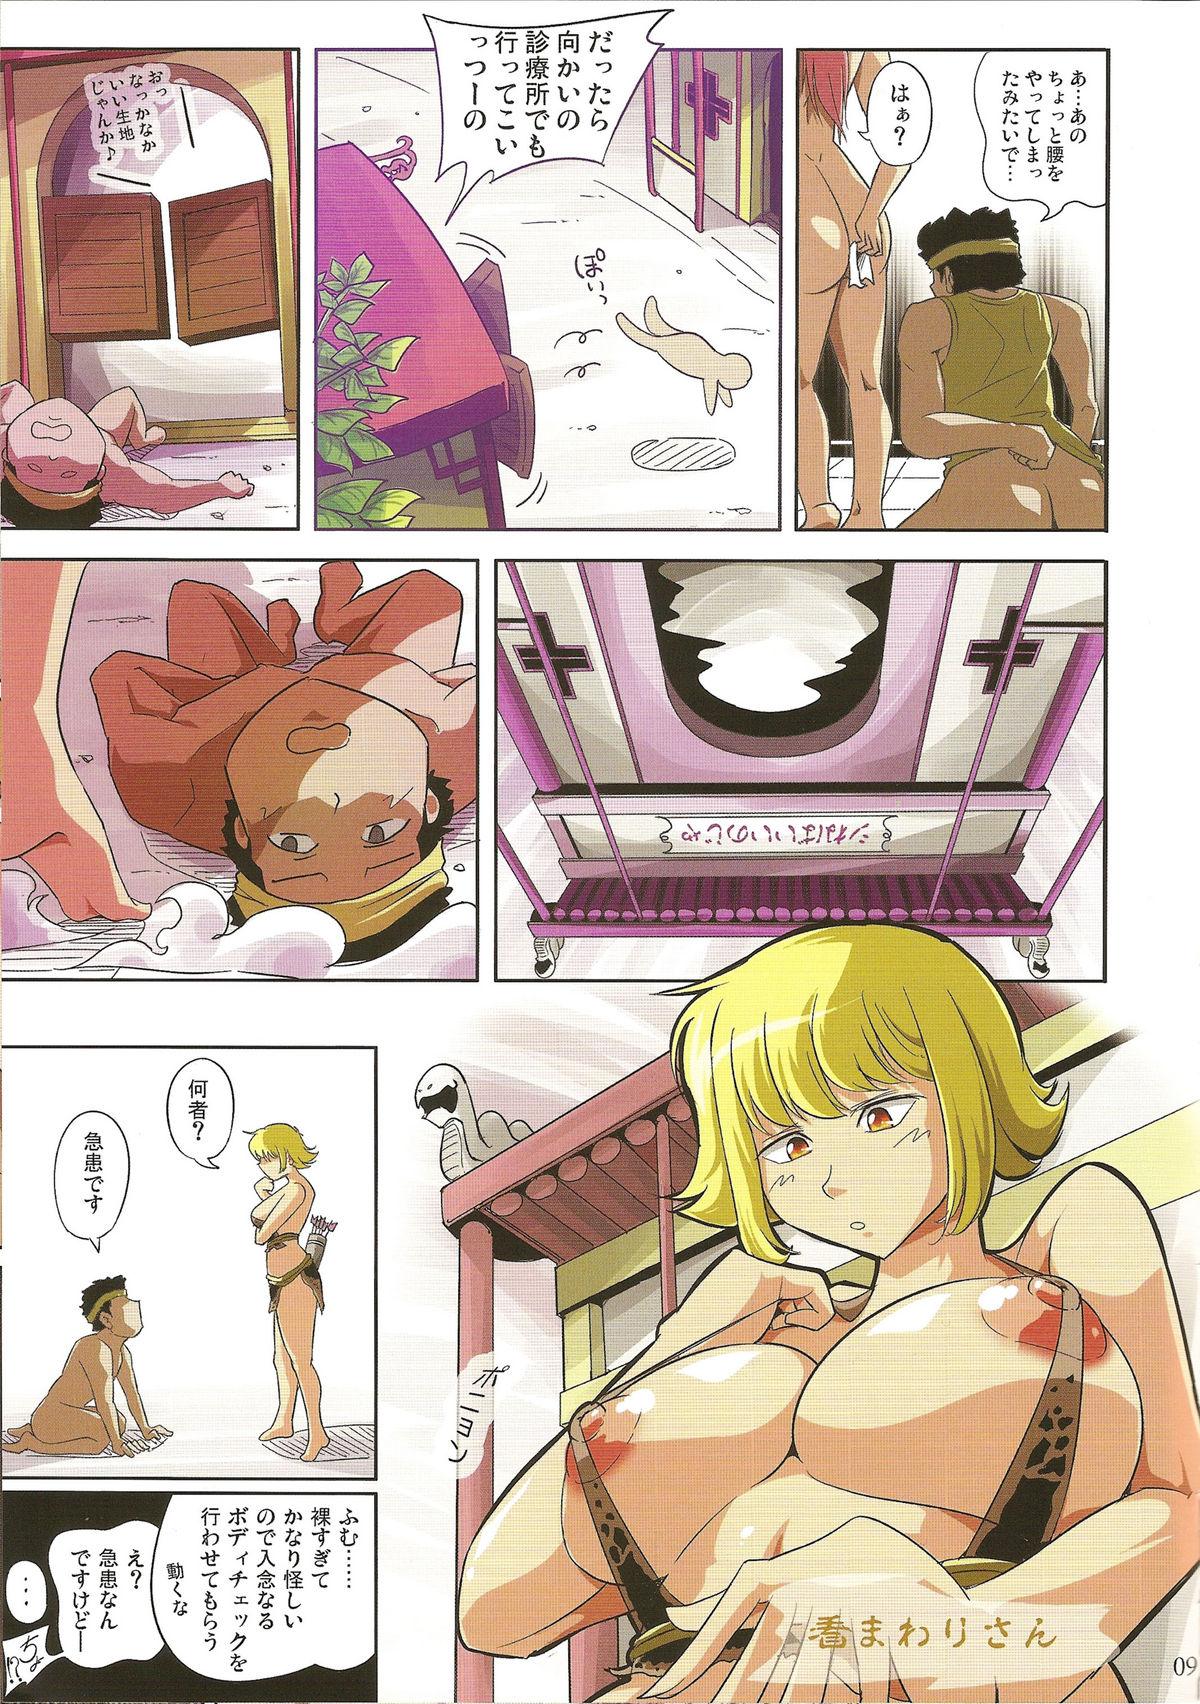 Beautiful Tougenkyou - One piece Super - Page 9